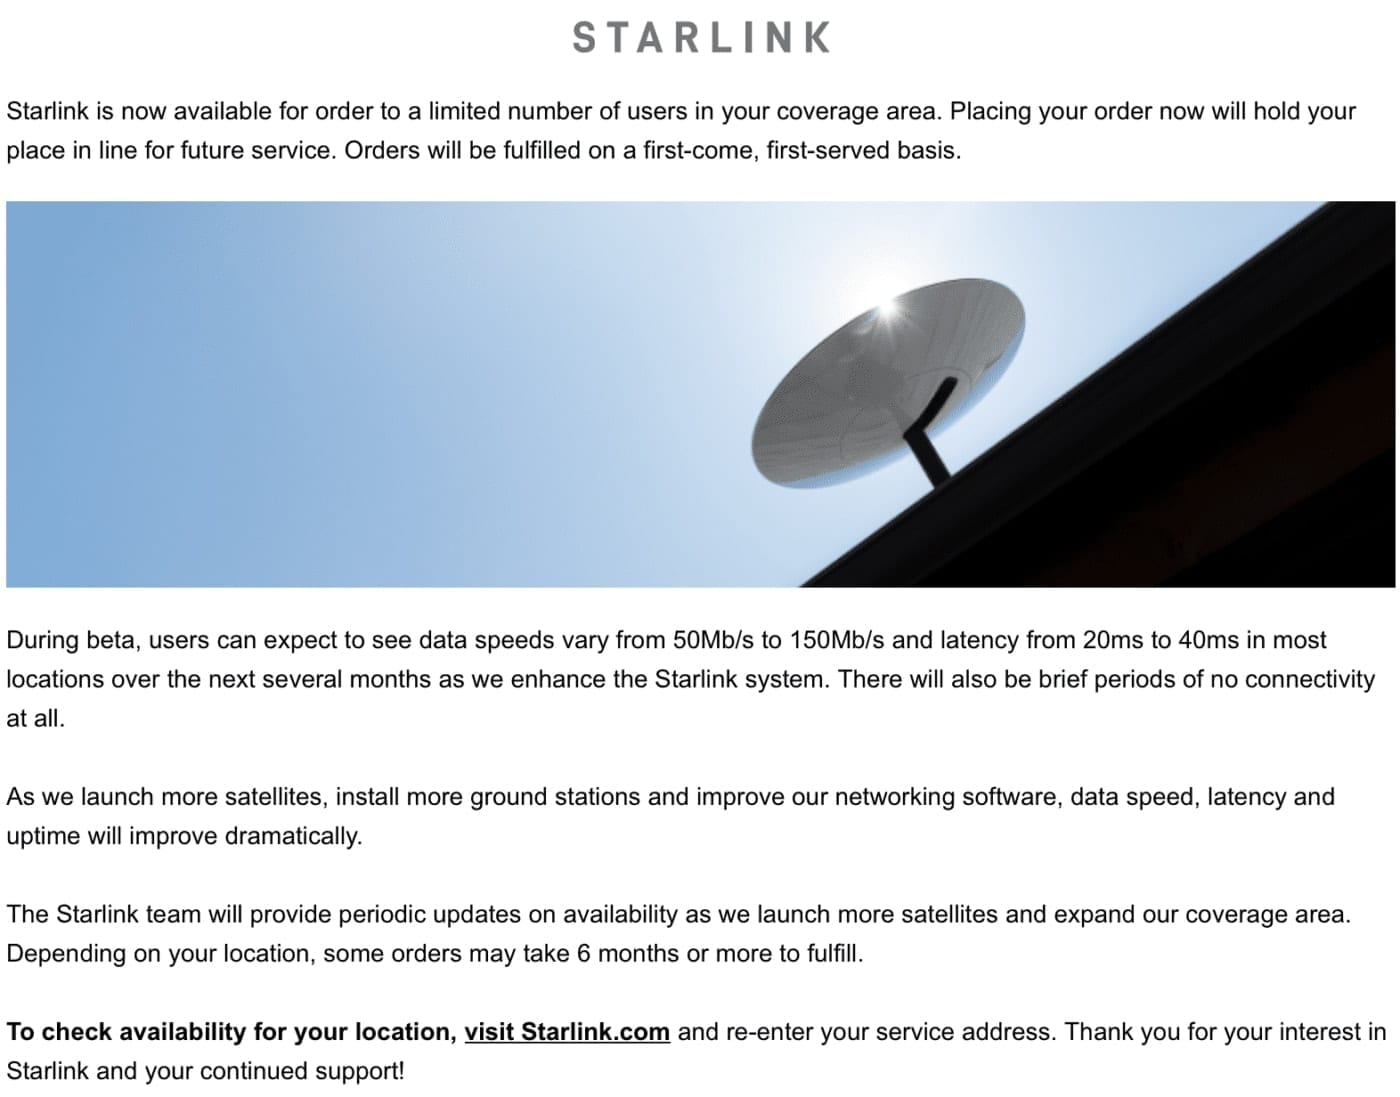 The email I received allowing me to order Starlink service (I didn't)